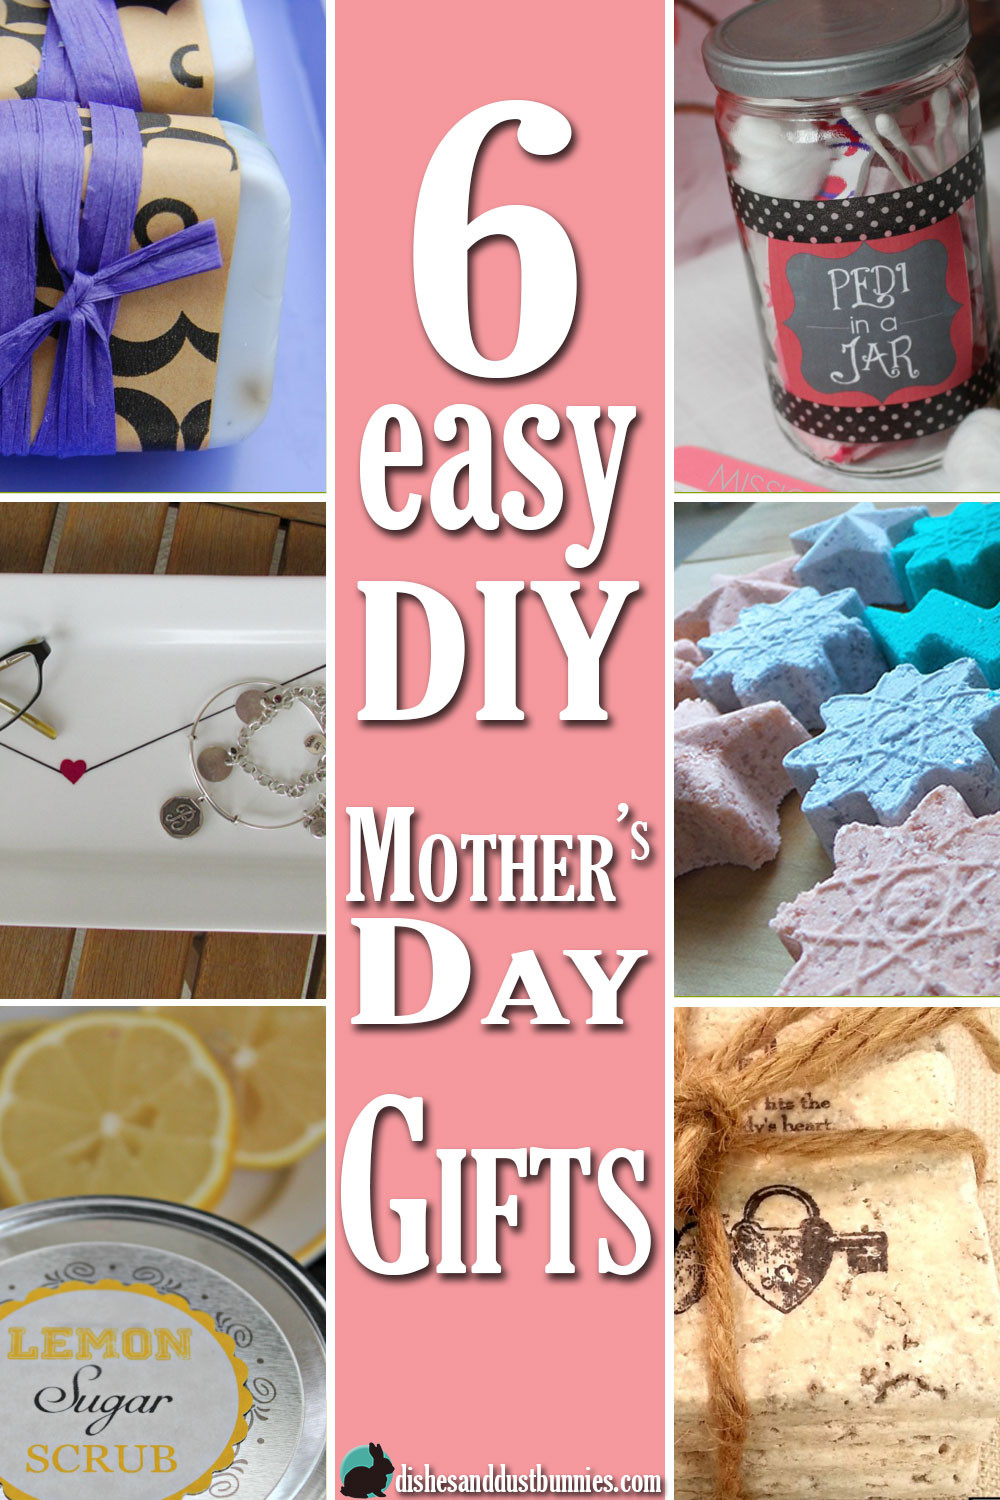 Best ideas about DIY Father'S Day Gifts From Baby
. Save or Pin 6 Easy DIY Mother s Day Gifts Dishes and Dust Bunnies Now.